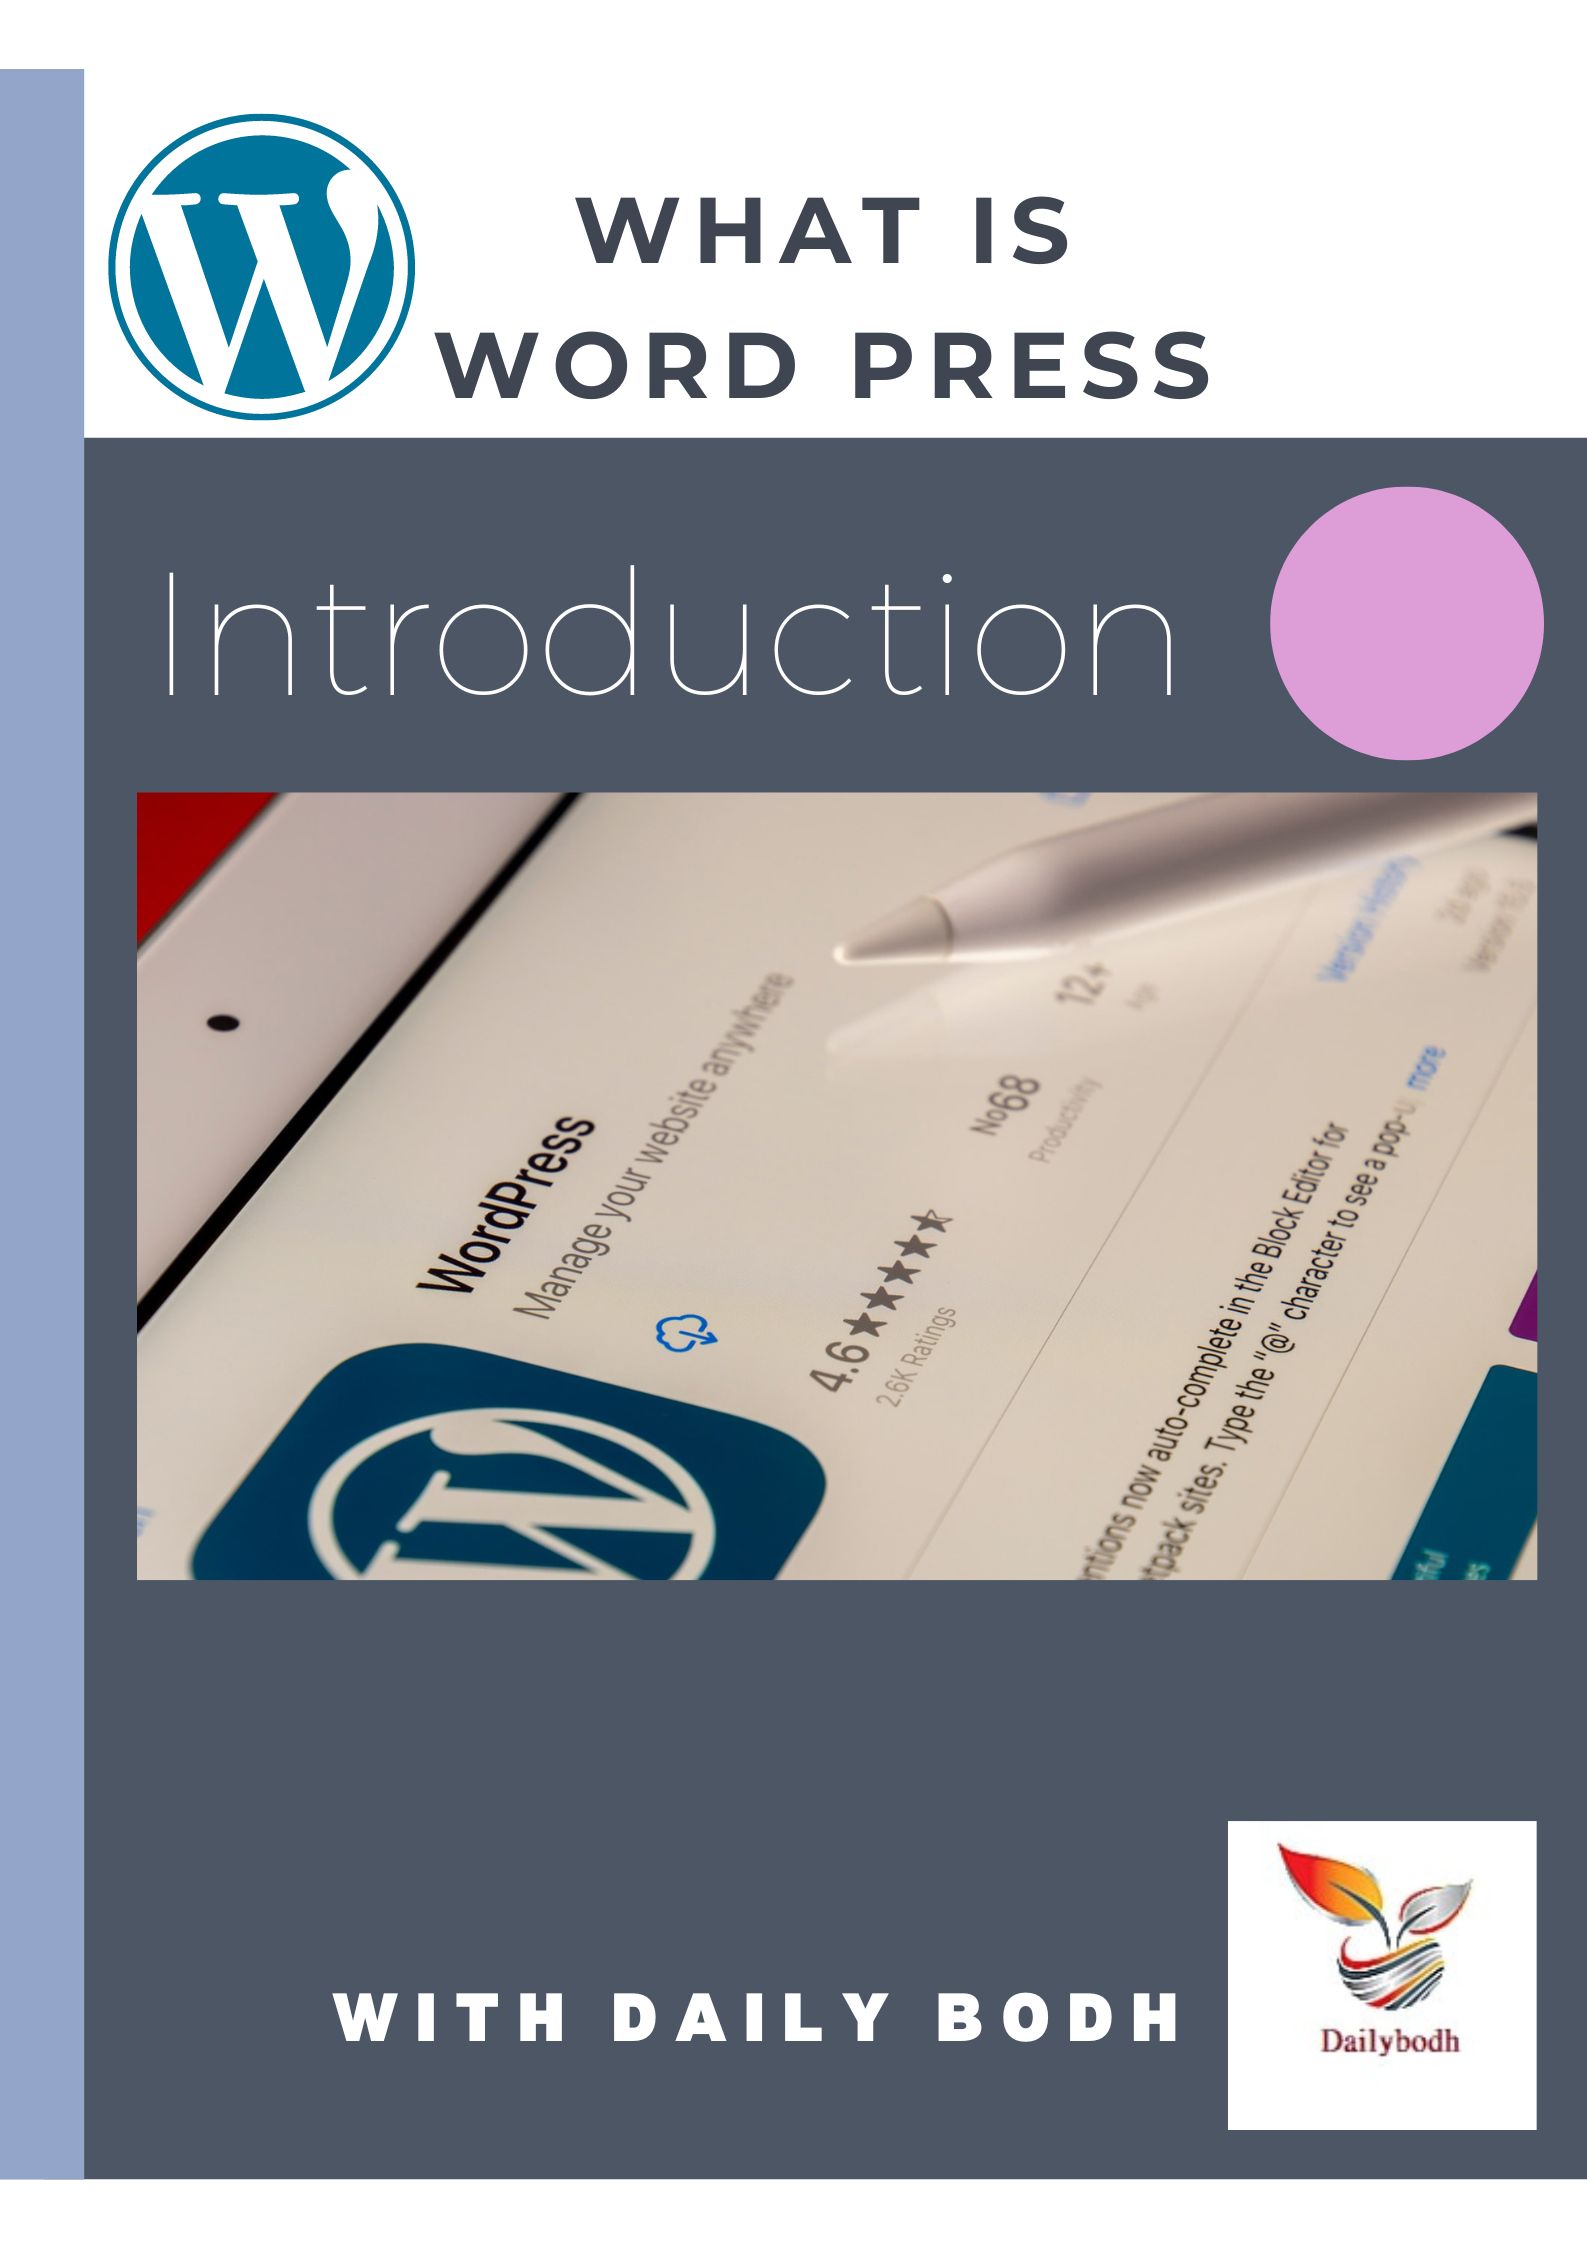 What is word press